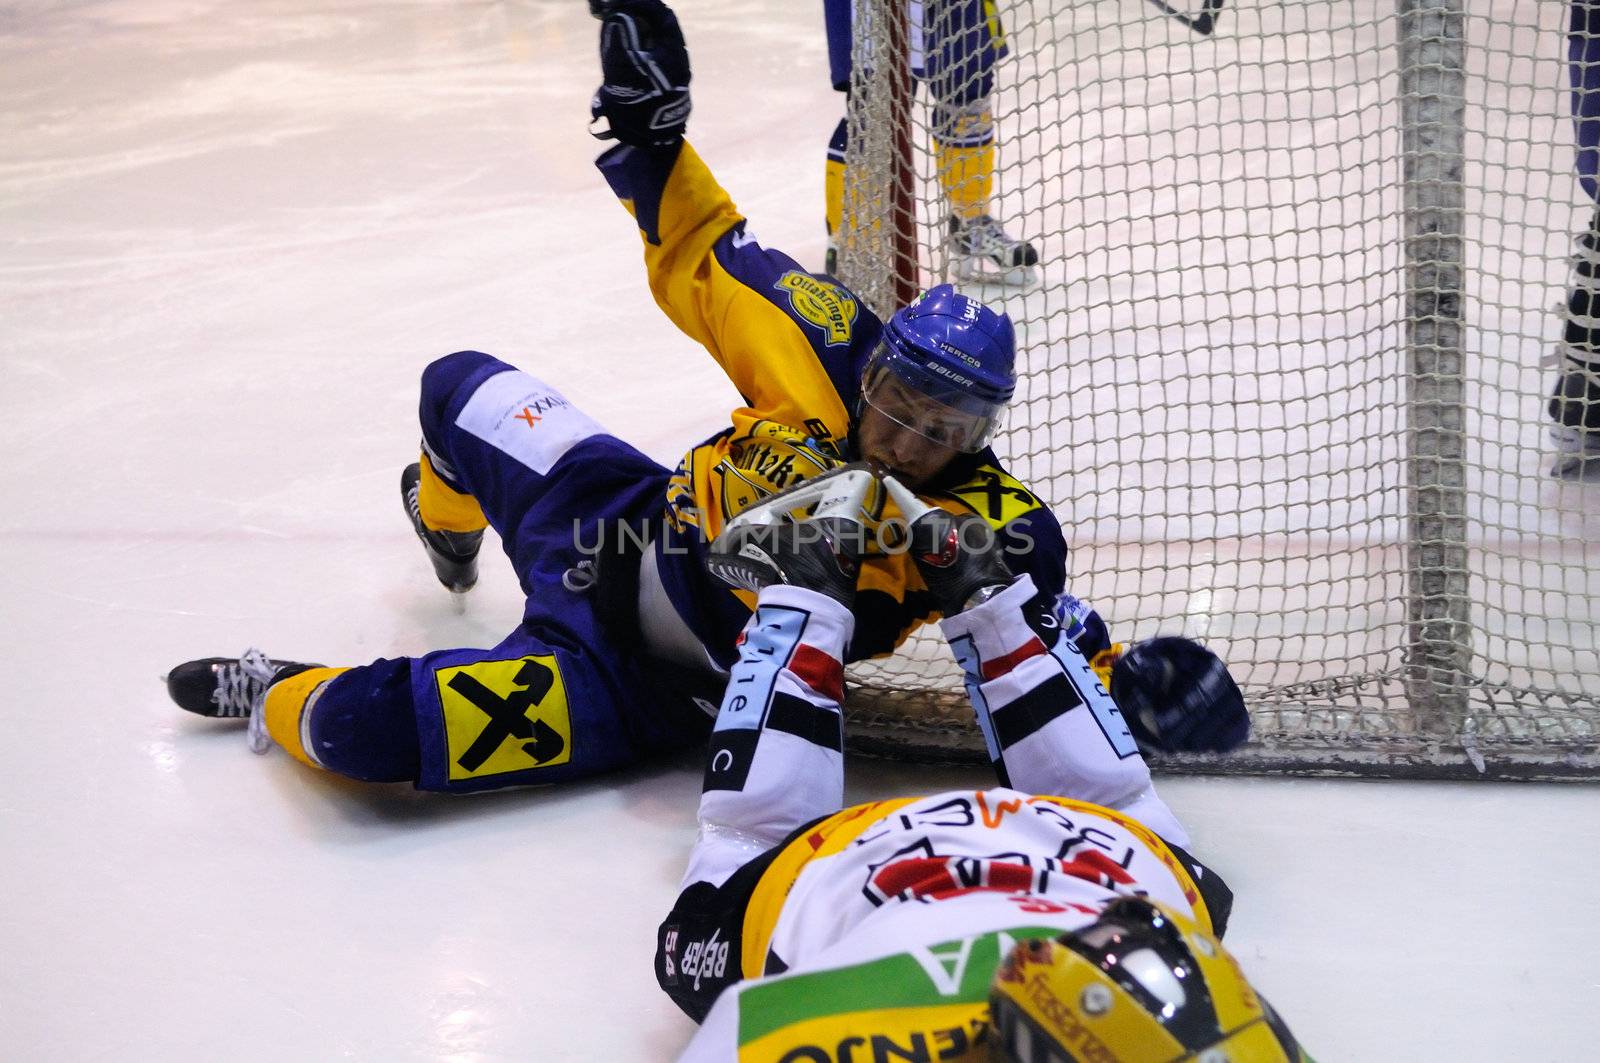 ZELL AM SEE, AUSTRIA - FEB 22: Austrian National League. Stefan Uhl gets caught by the skates of VEU player. Game EK Zell am See vs. VEU Feldkirch (Result 3-1) on February 22, 2011 at hockey rink of Zell am See